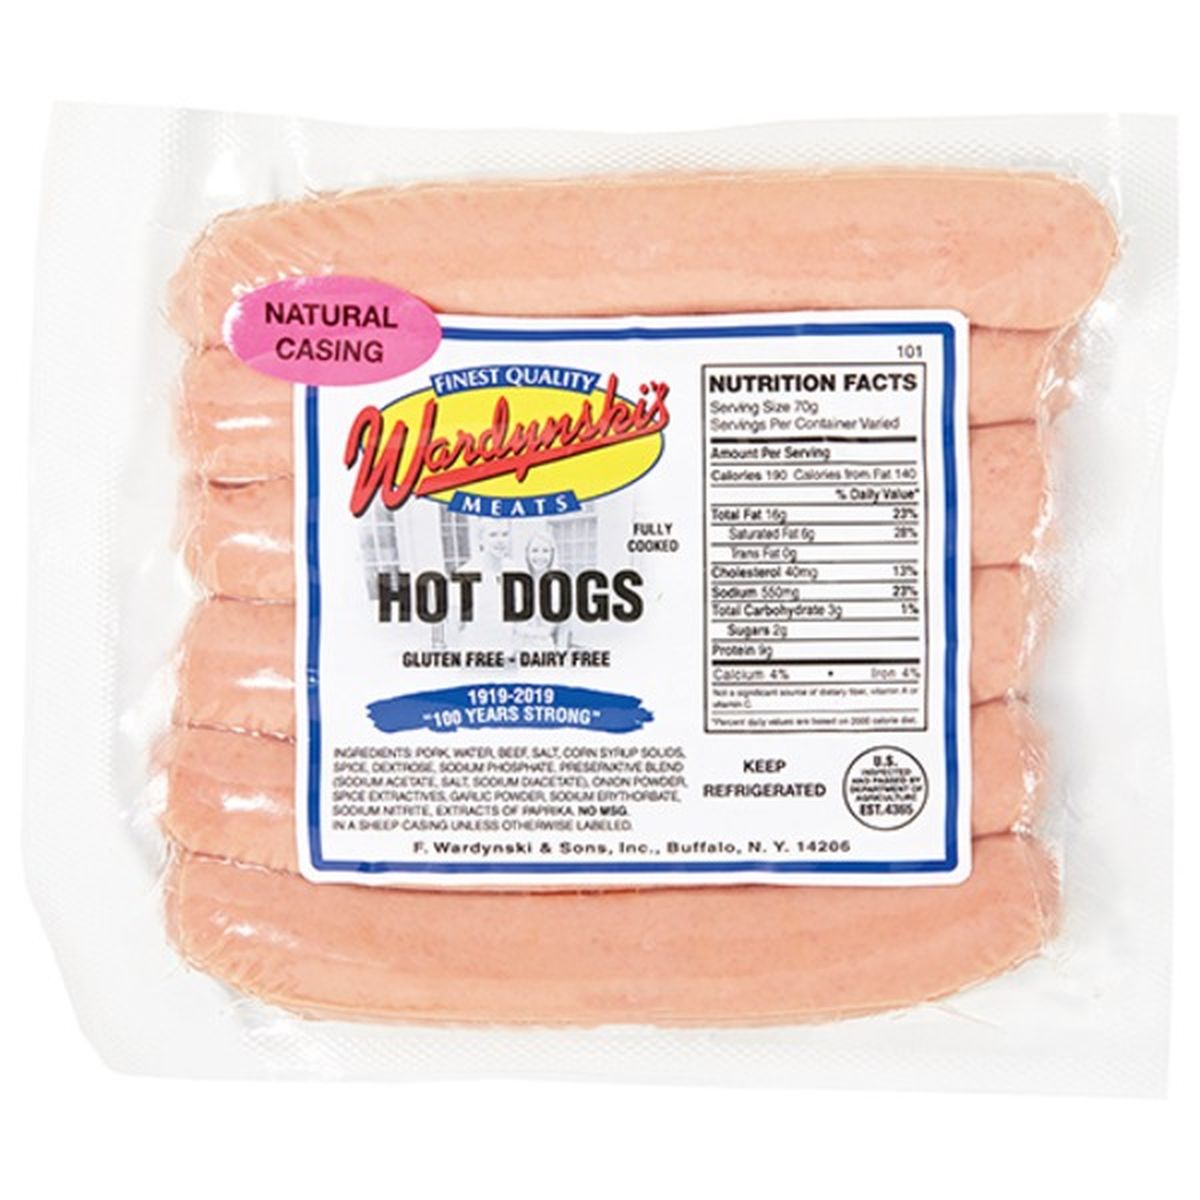 Calories in Wardynski's Natural Casing Hots